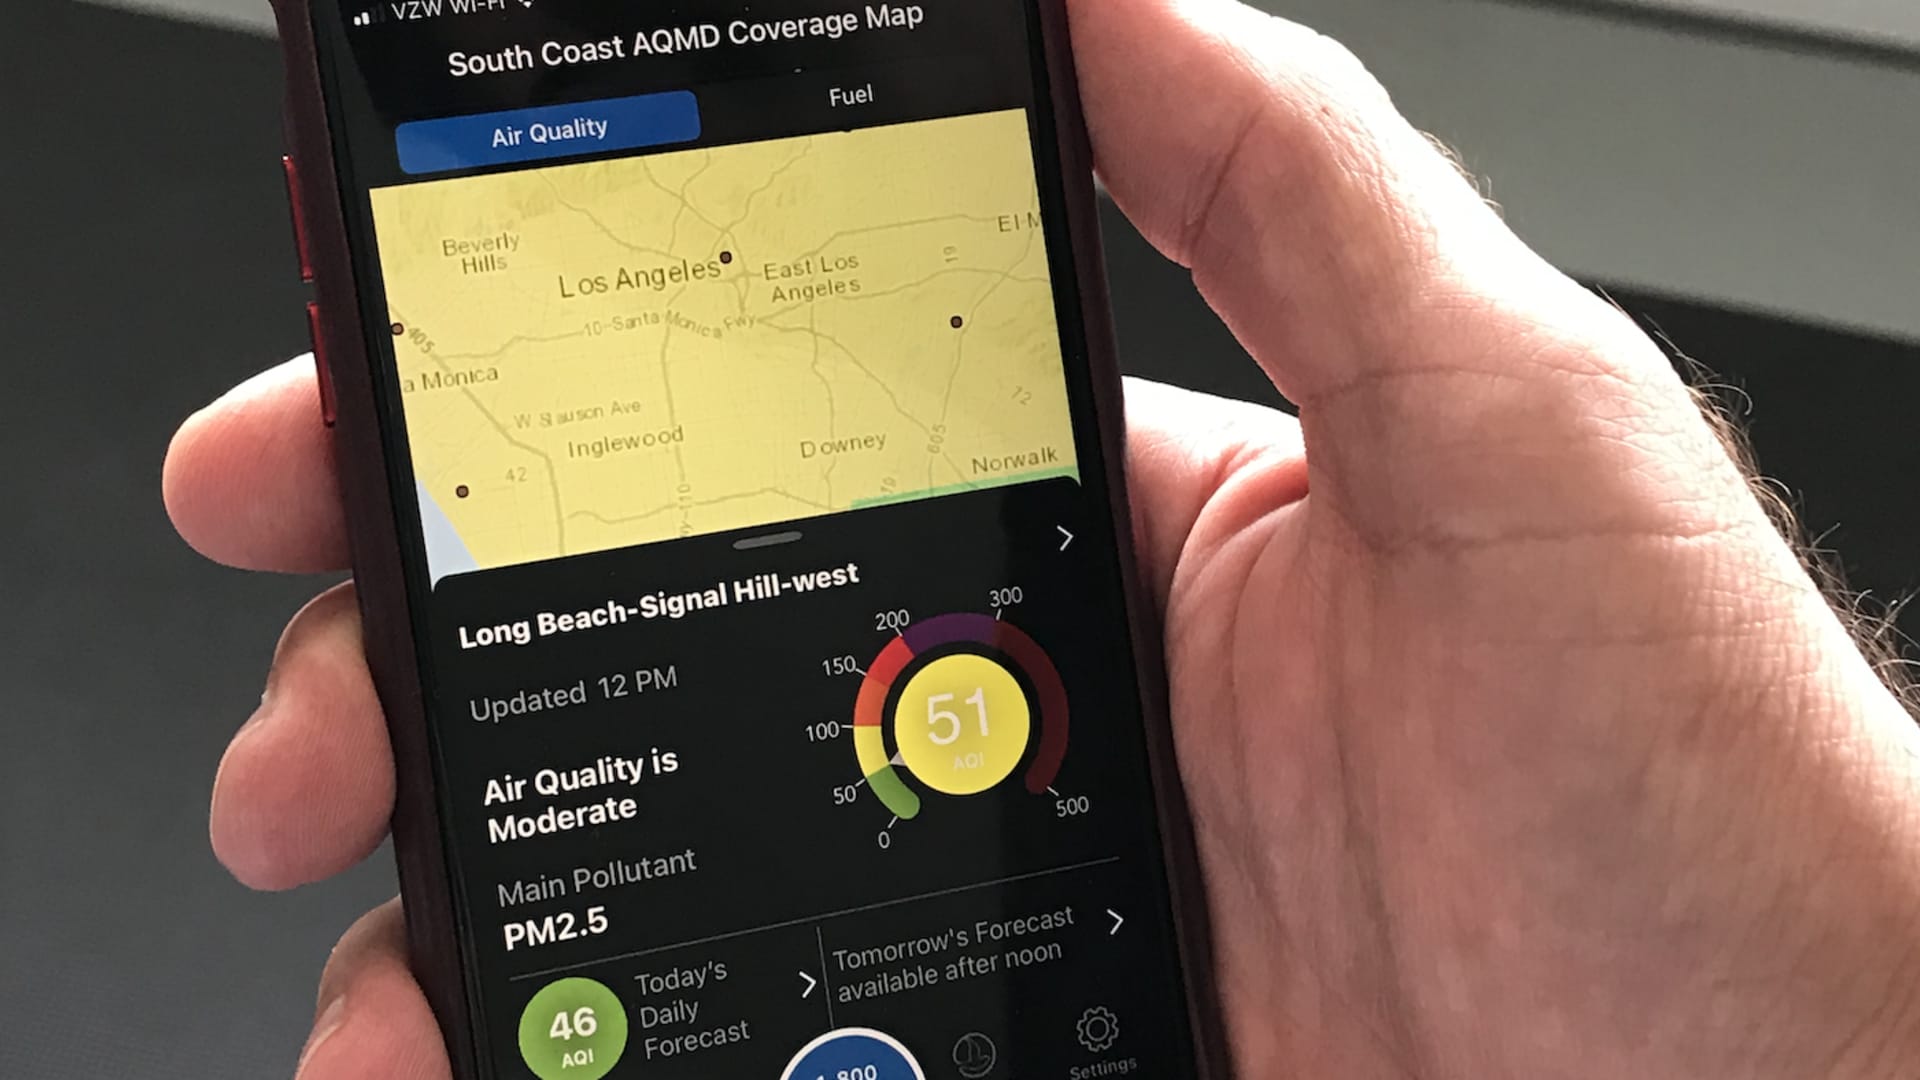 The South Coast AQMD app shows air pollution levels in Greater Los Angeles.